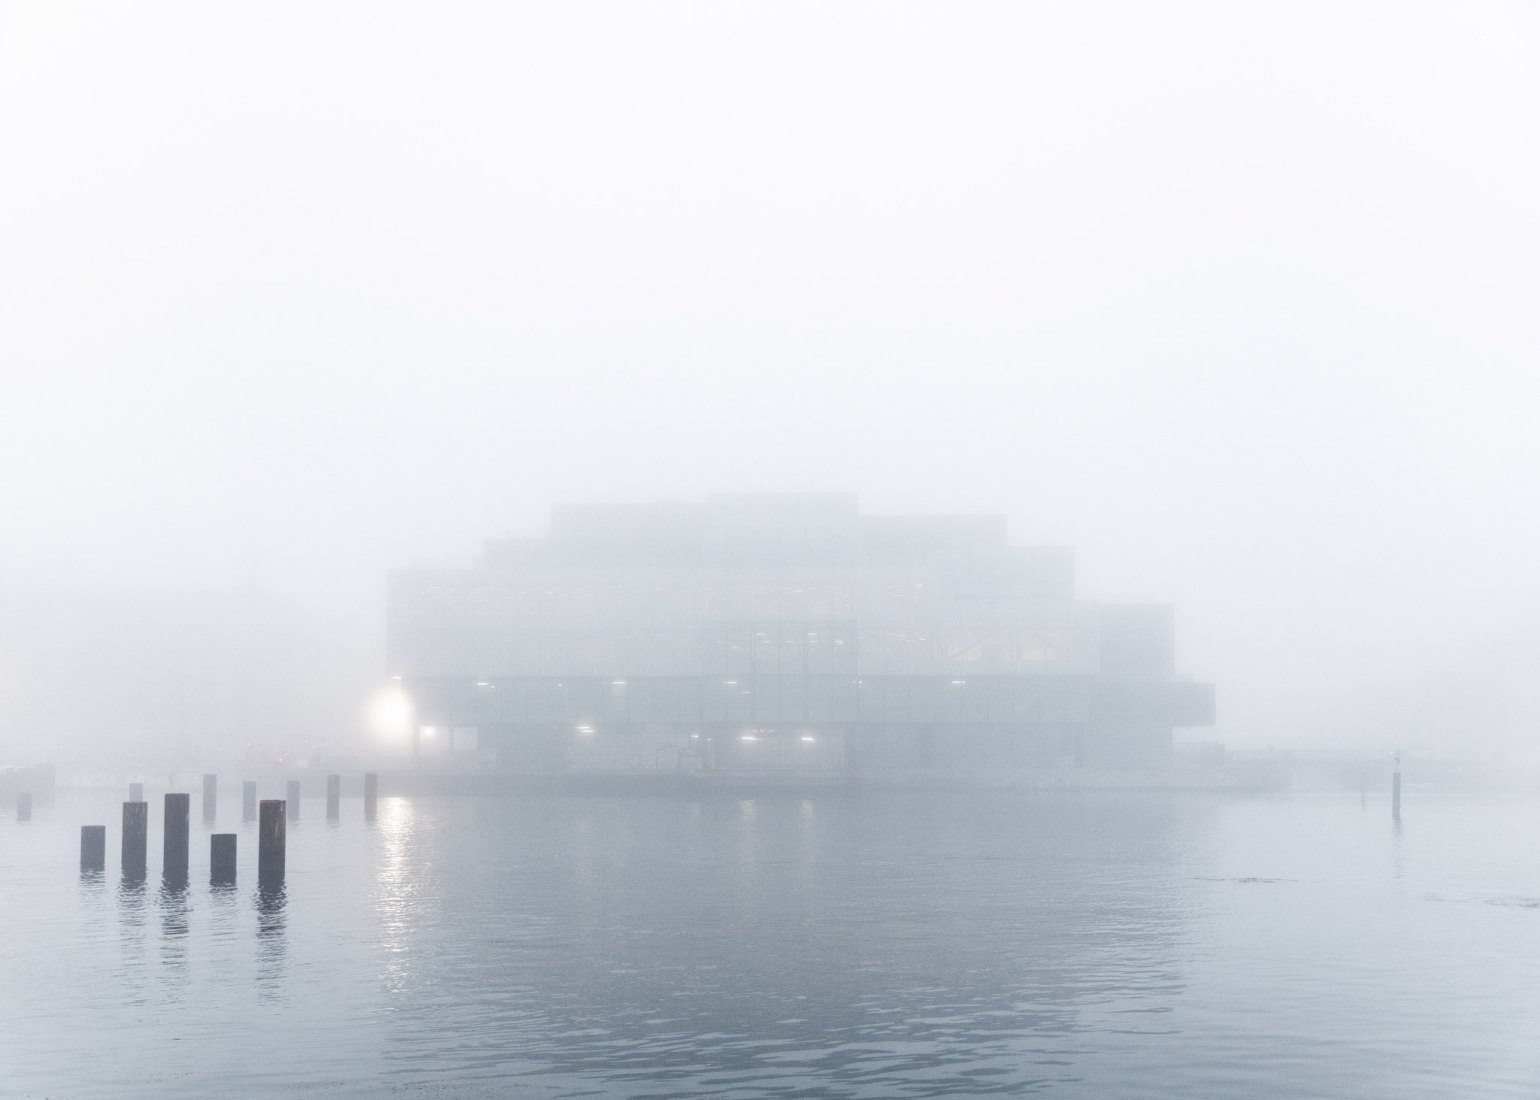 View from the sea. BLOX / DAC by OMA. Photograph by © Rasmus Hjortshøj / Coast studi. Image courtesy of OMA